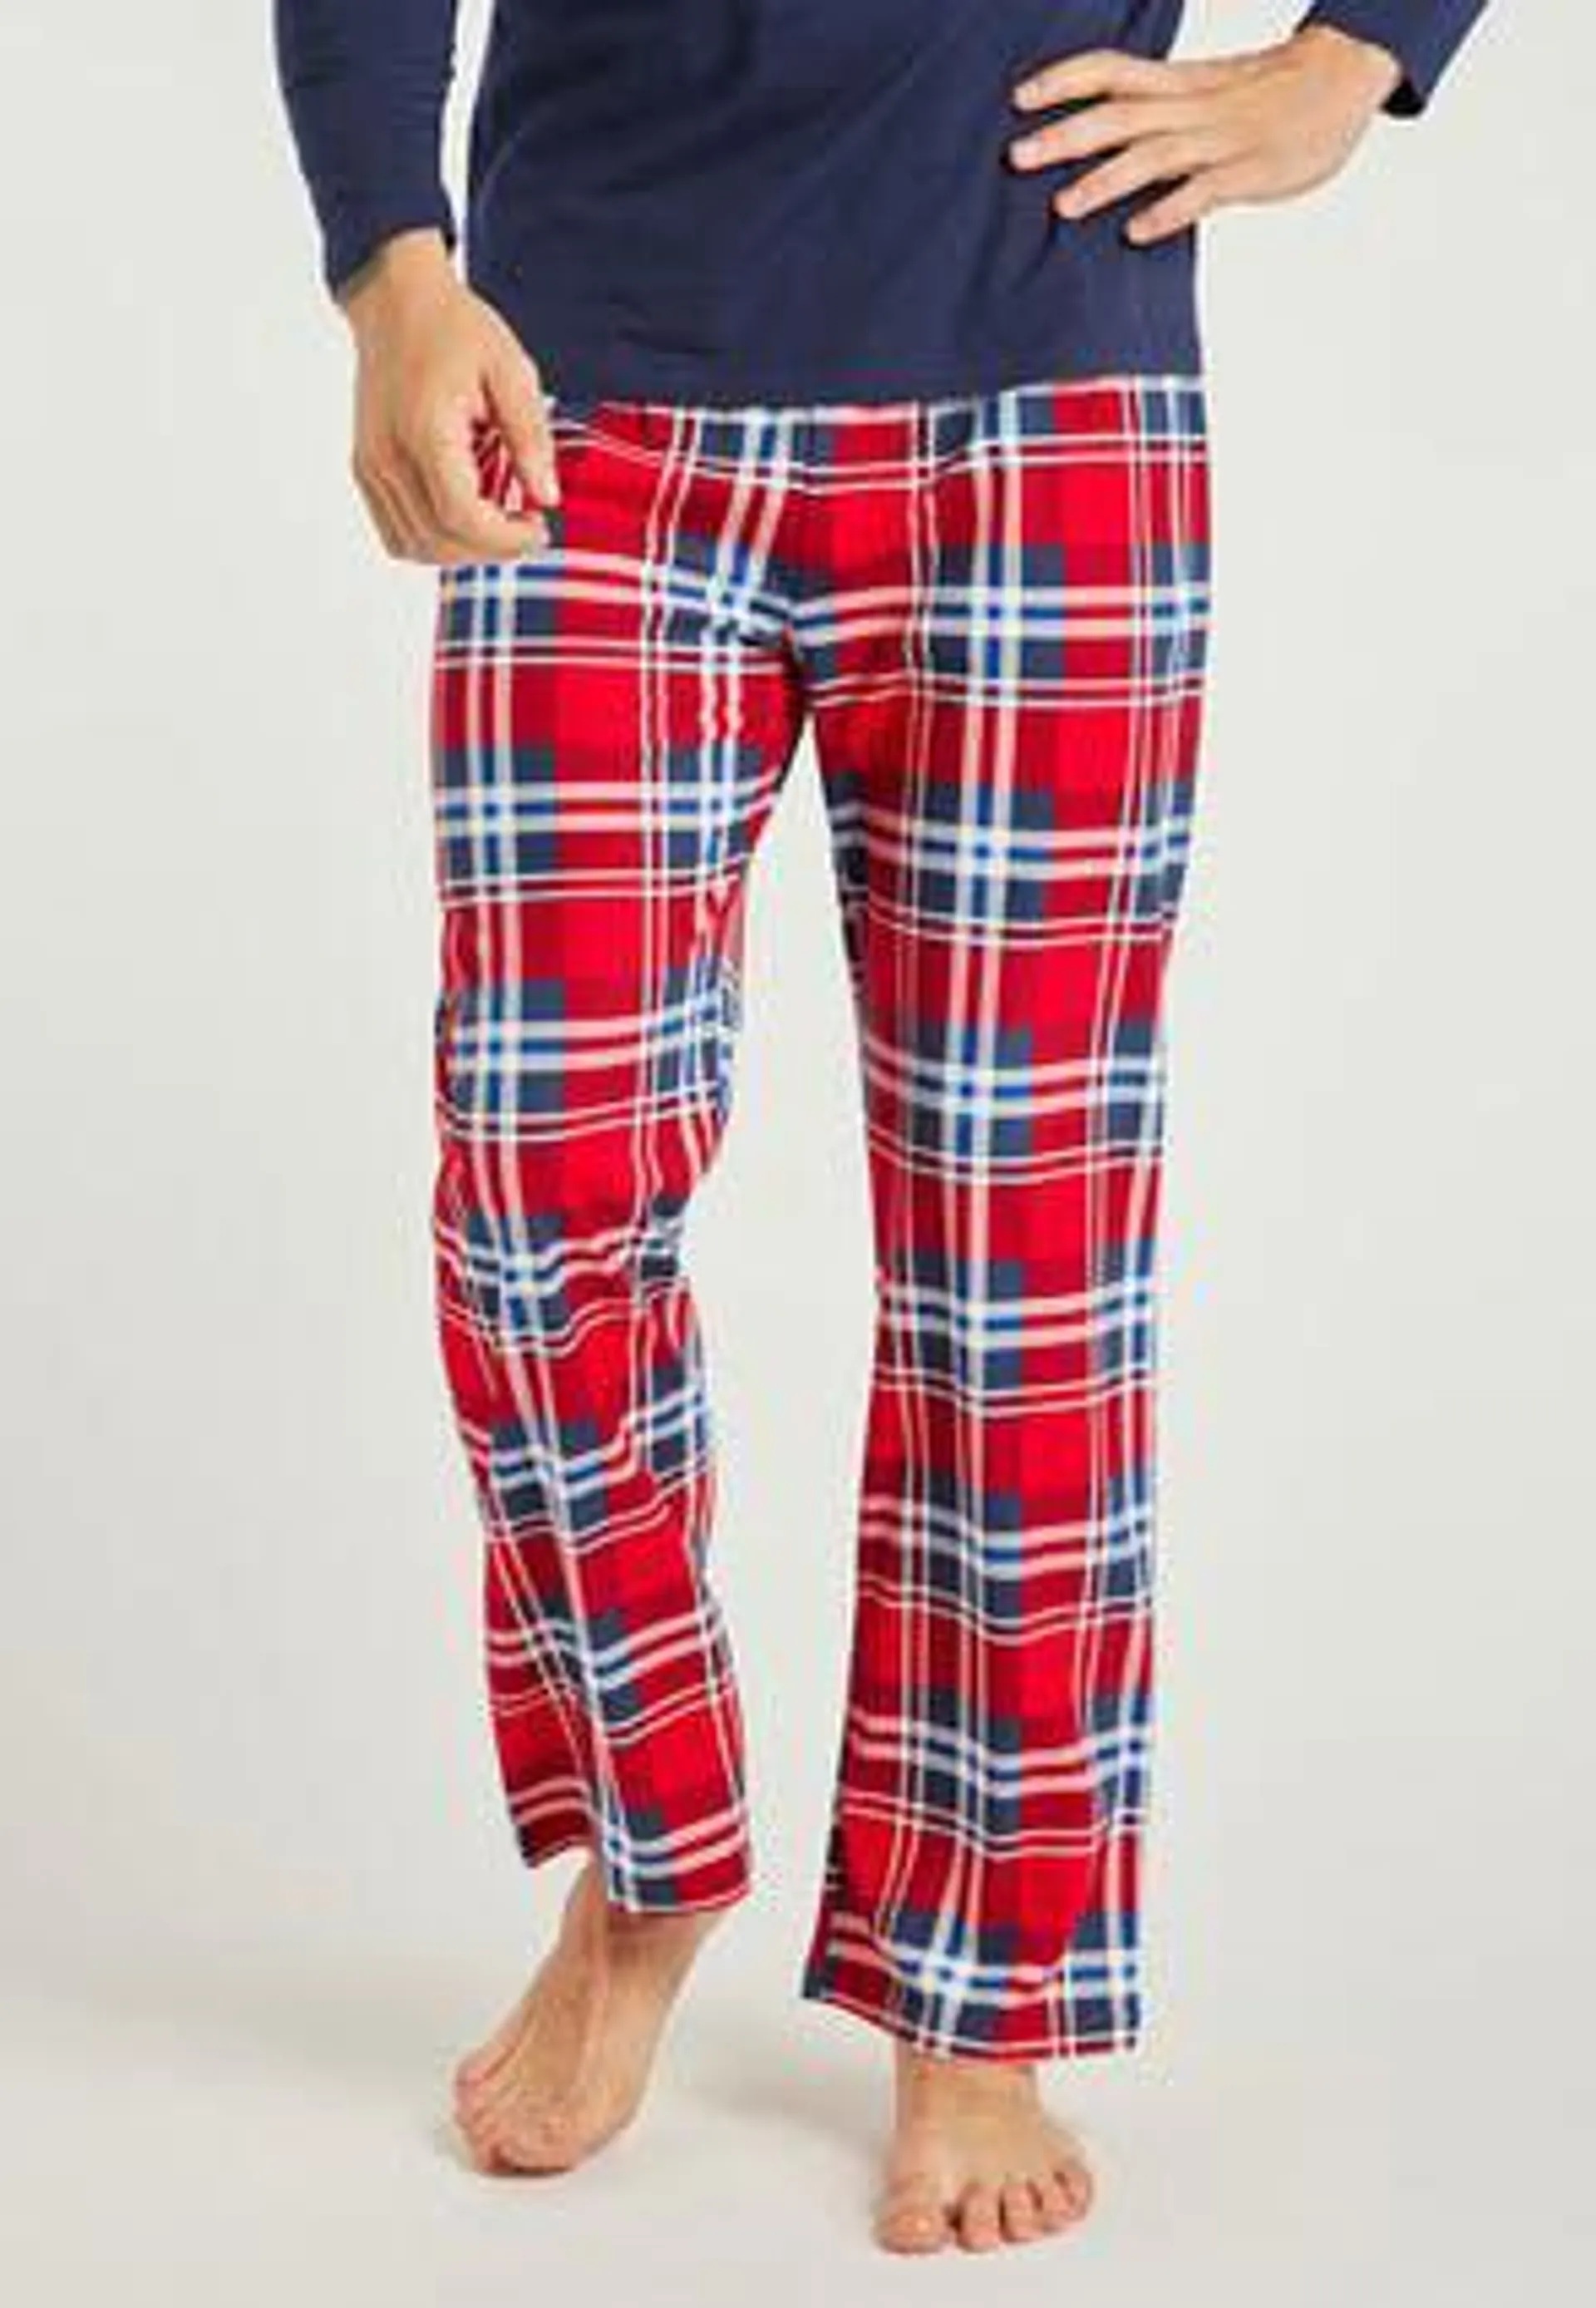 Mens Red and White Check Pyjama Bottoms